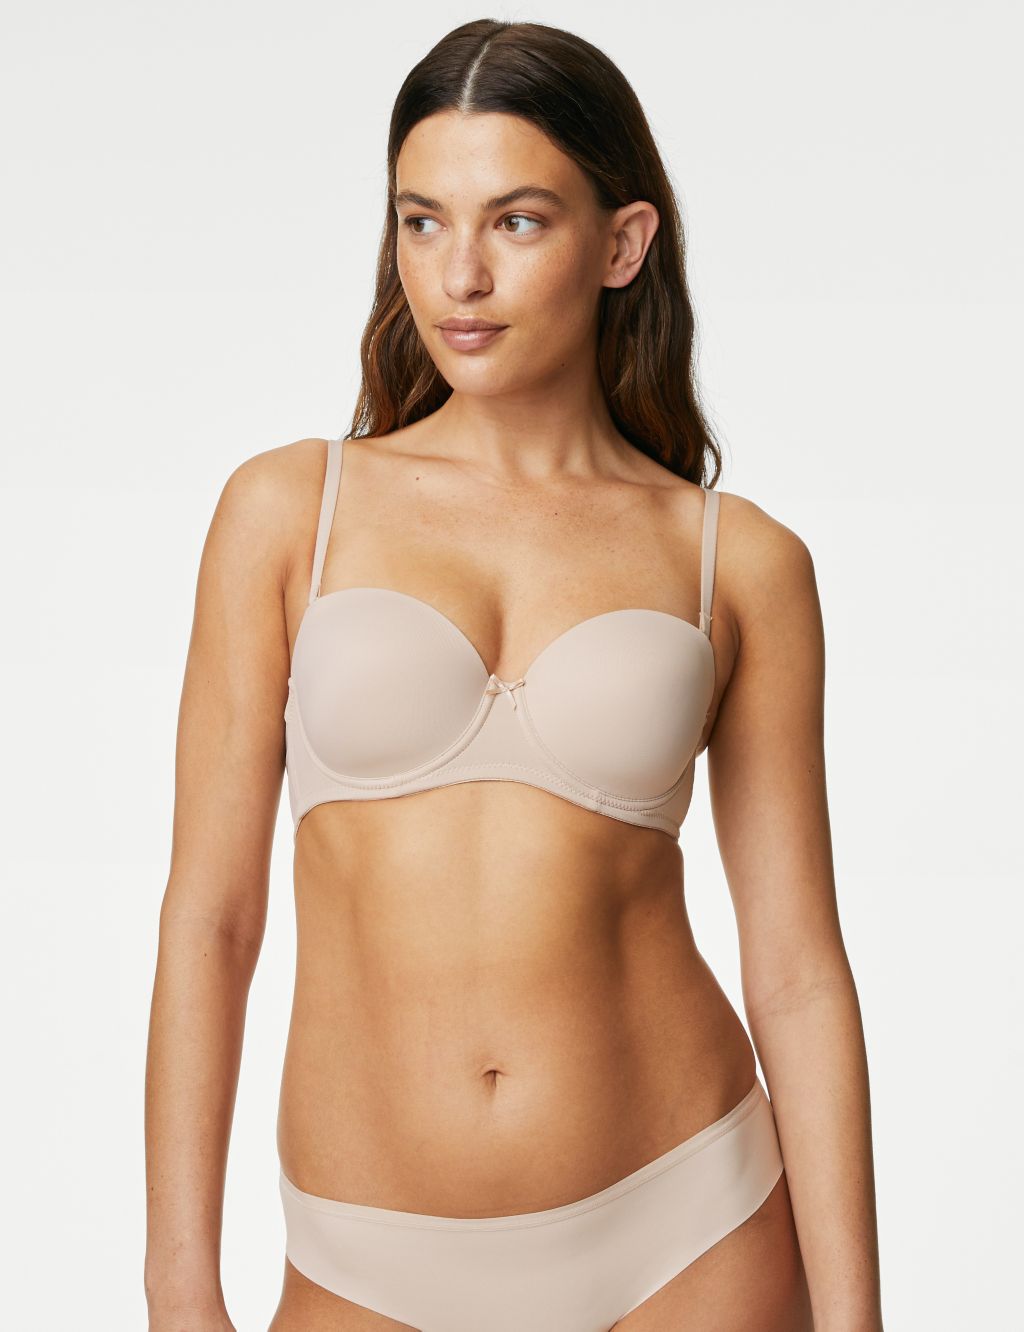 Strapless bra, Top Rated Bras